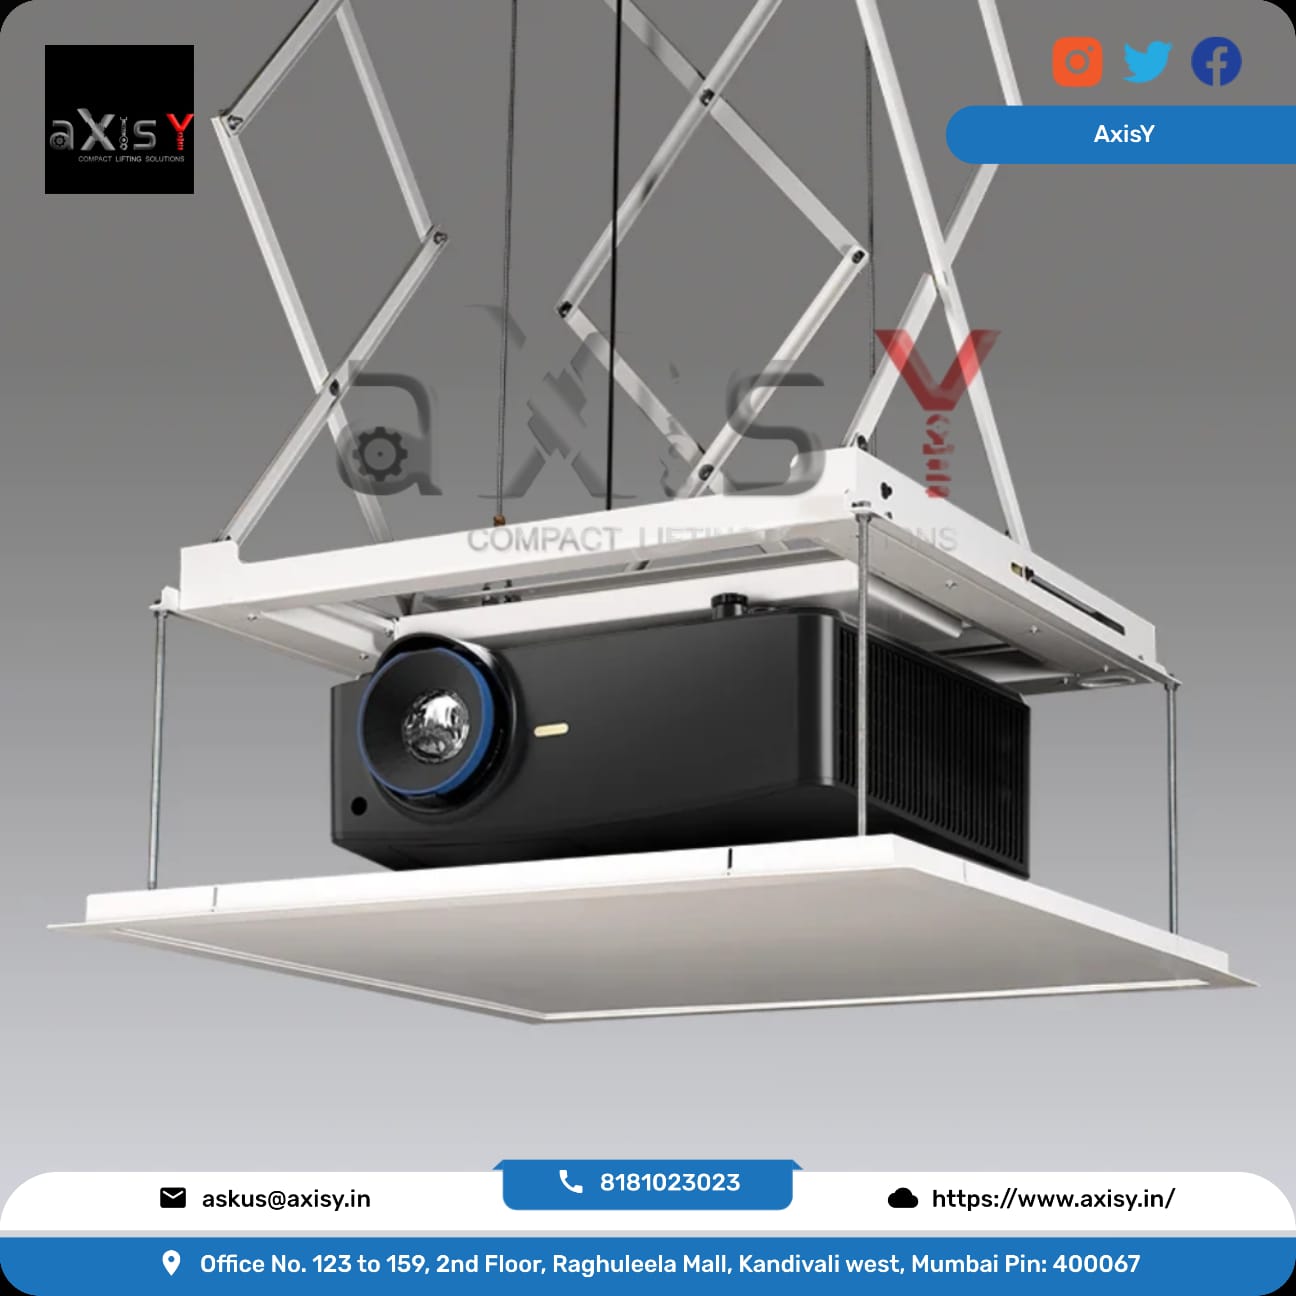 Elevate Your Presentations with Precision: The Scissor Projector Lift Guide